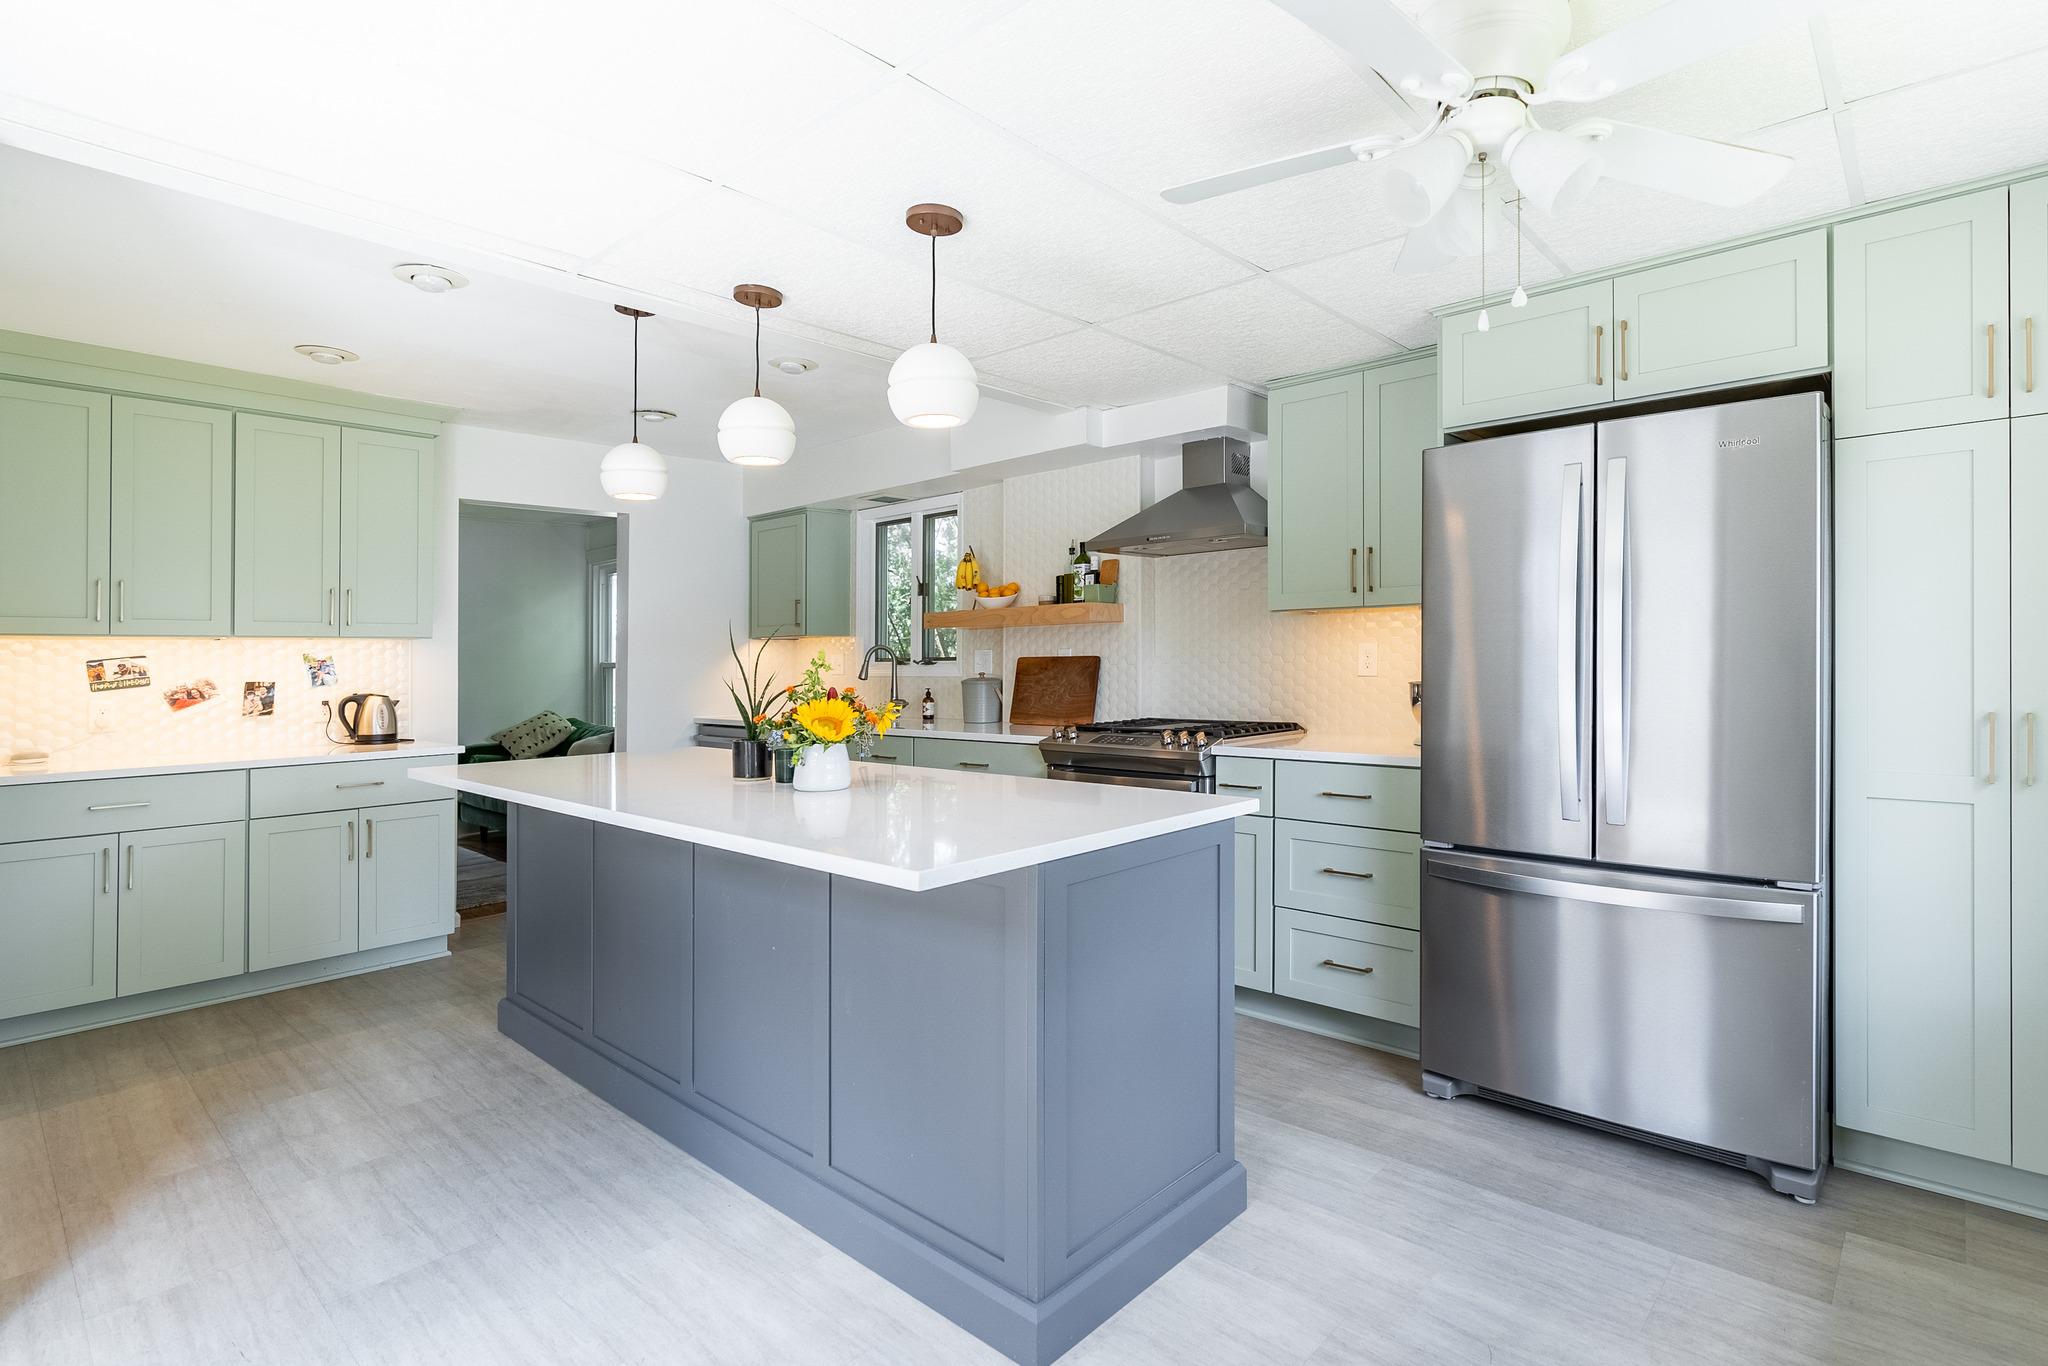 Adding color to your kitchen cabinets can give the room an eye-catching look, while adding contrast  Kitchen Tune-Up Savannah Brunswick Savannah (912)424-8907